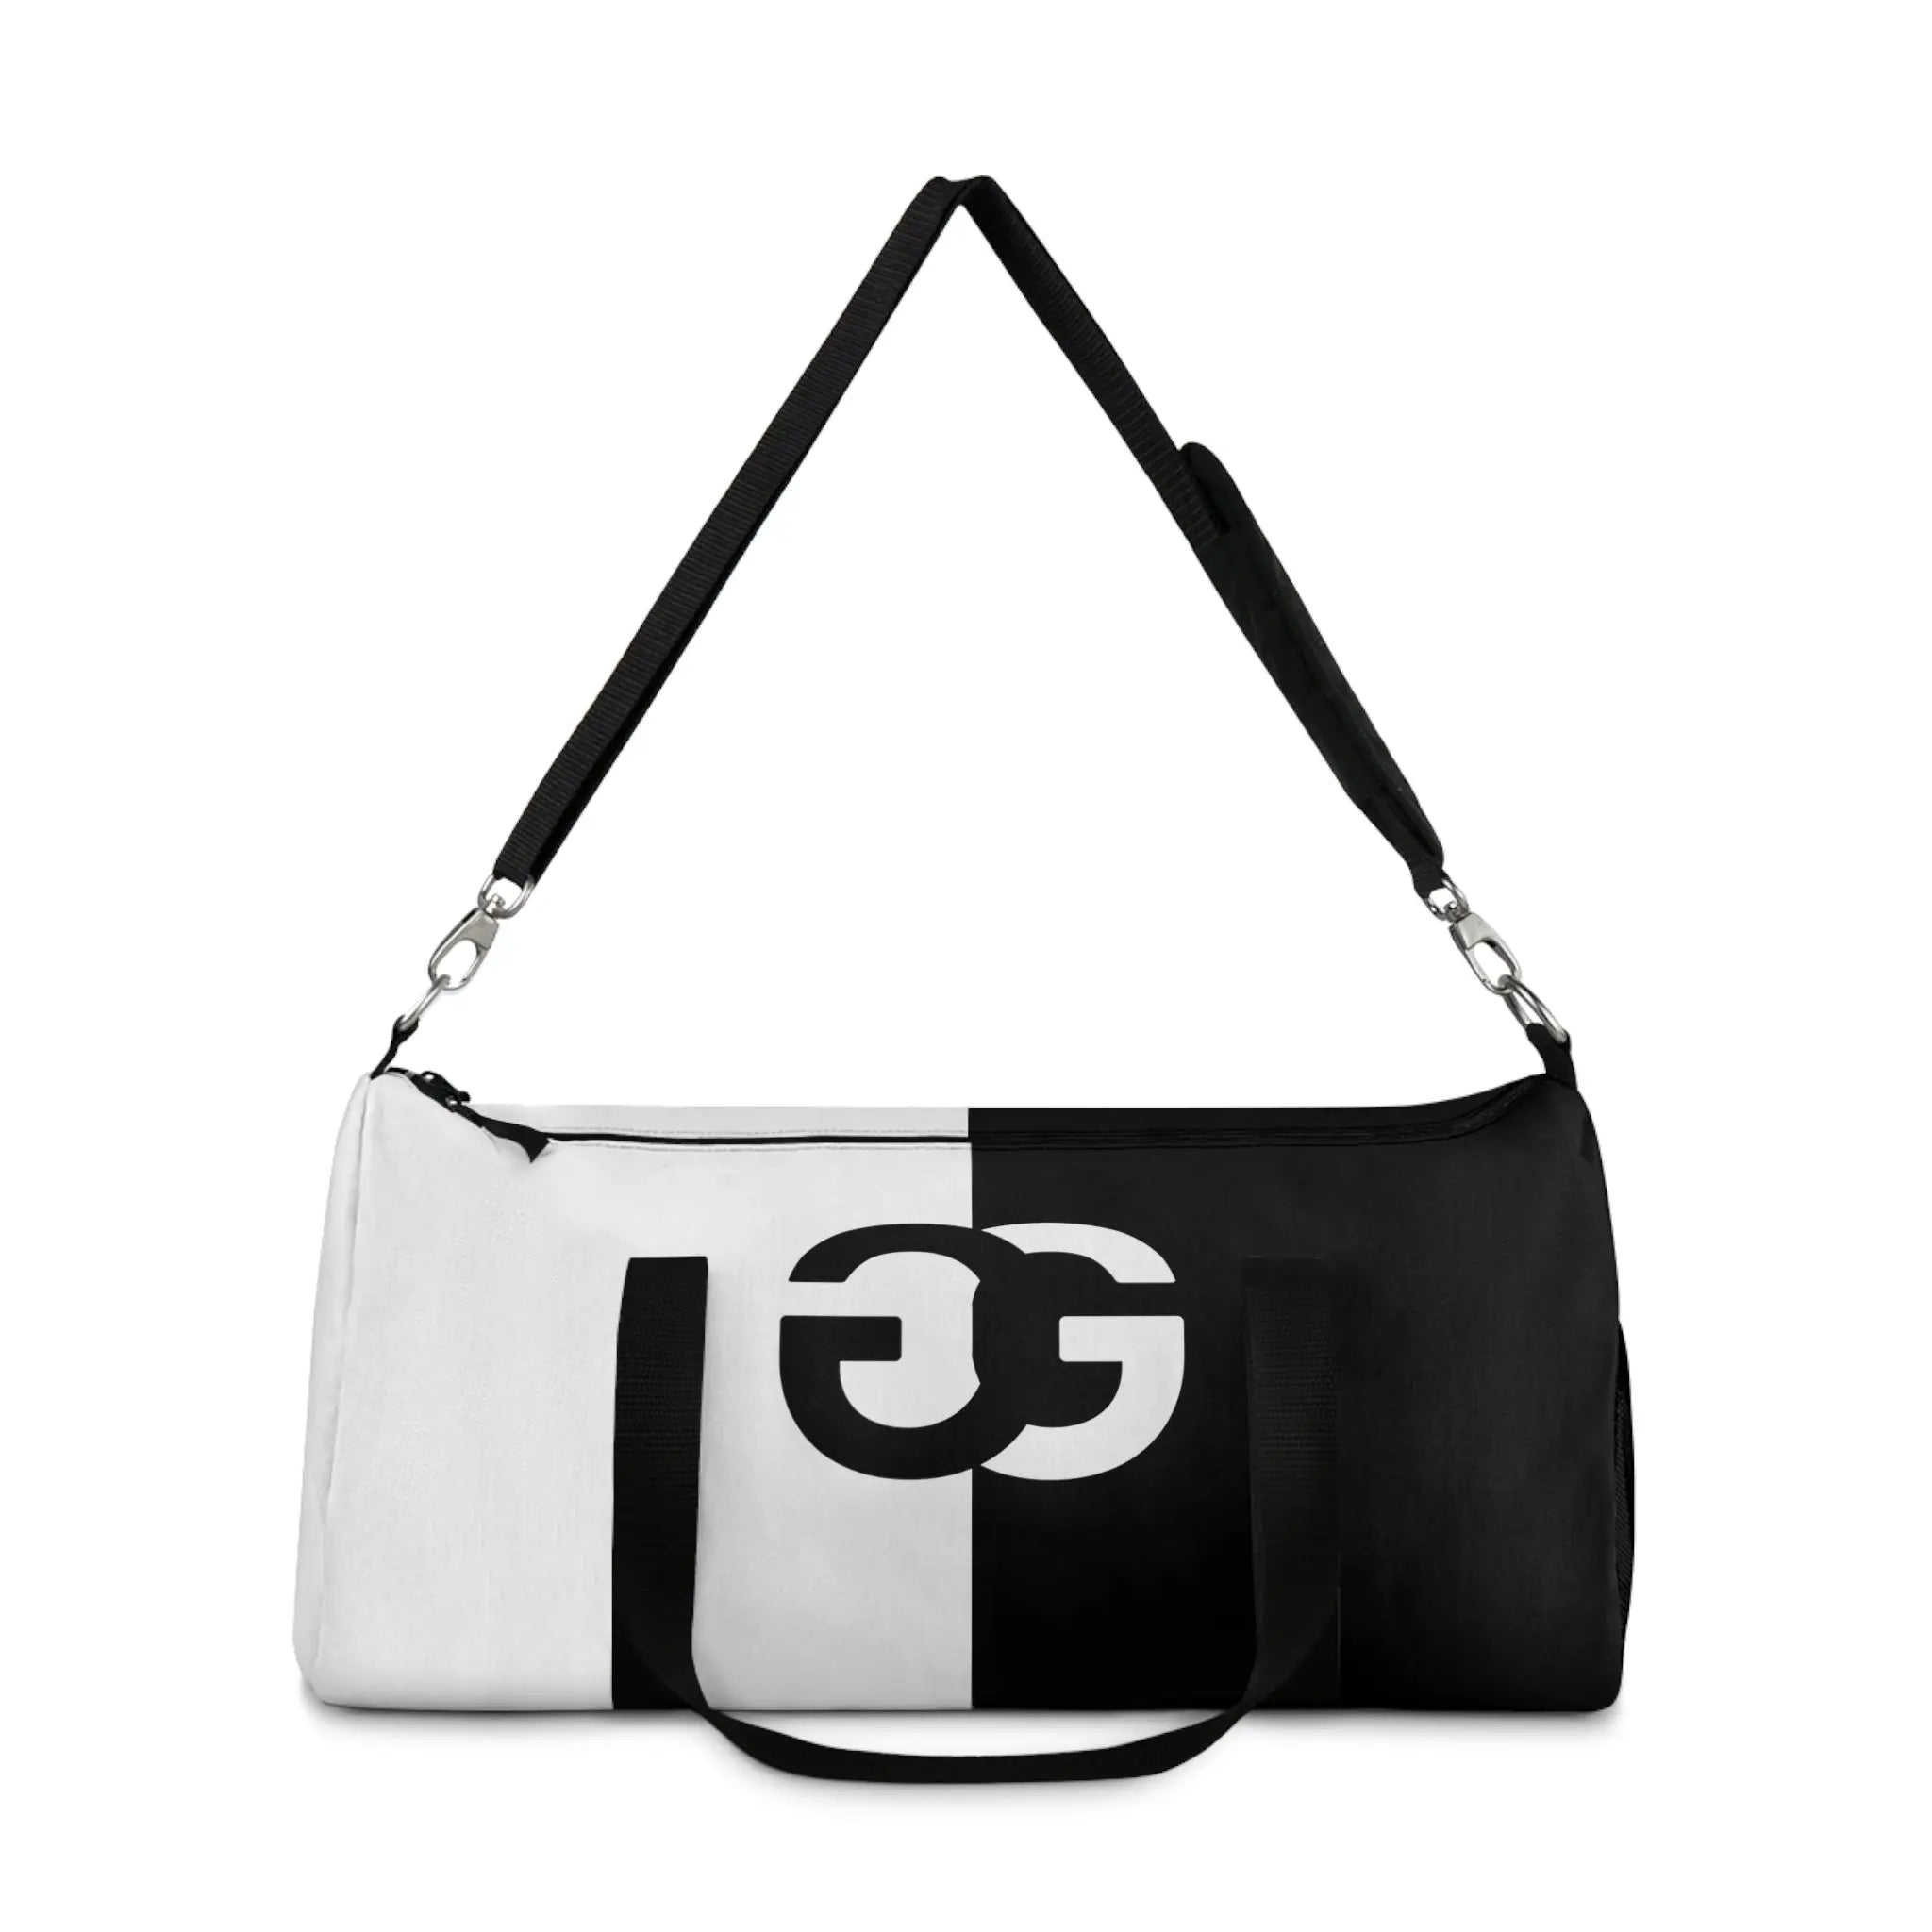  G is for Groove (Black and White) Duffel Bag BagsLarge